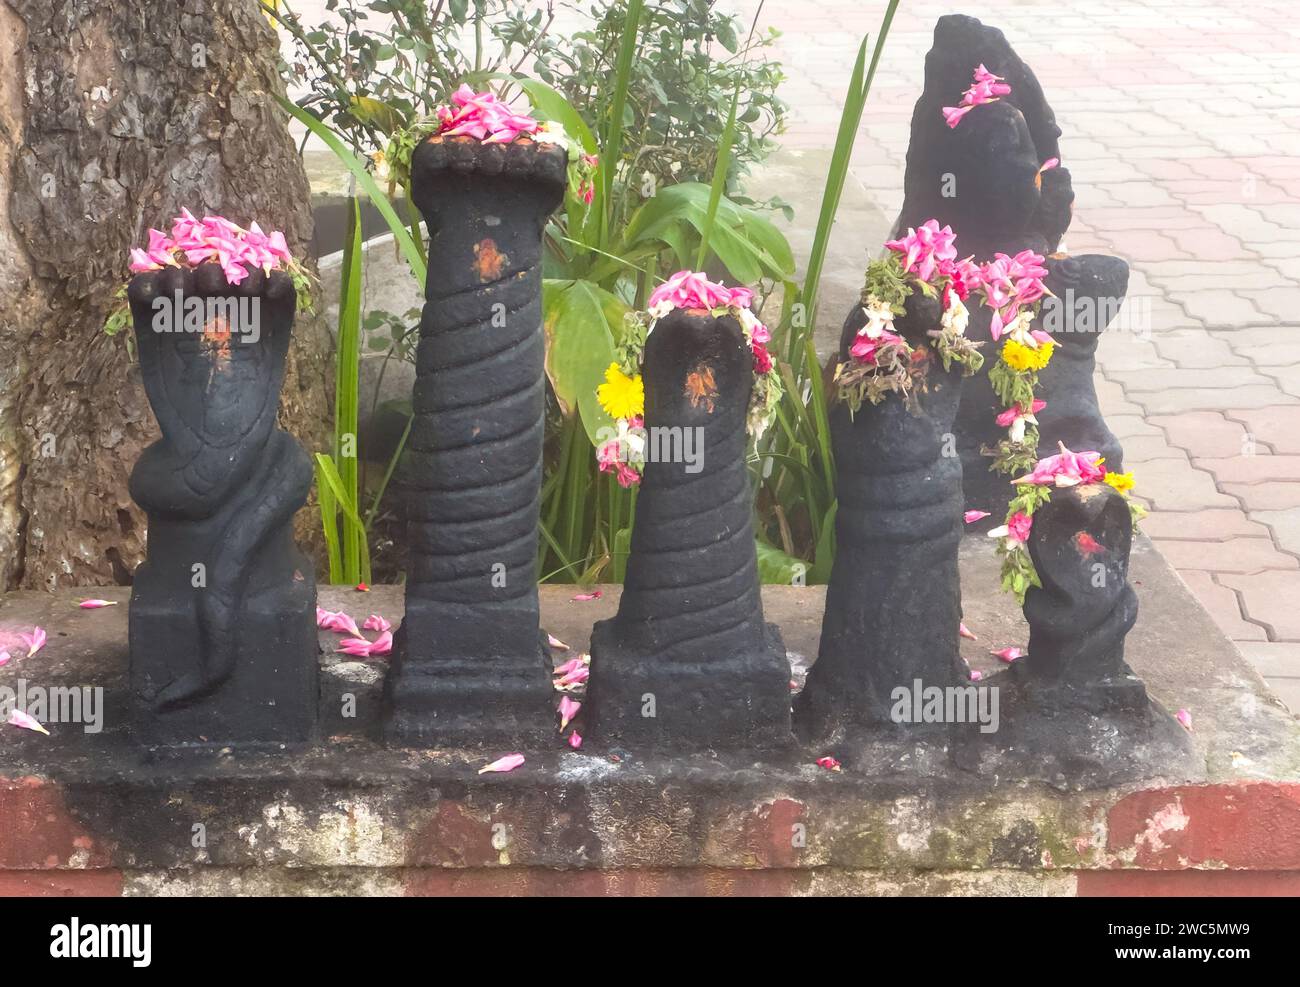 Snake gods at the Kuzhanthai Velapar Temple (means baby lord murugan temple) with flowers worshipped by devotees Stock Photo